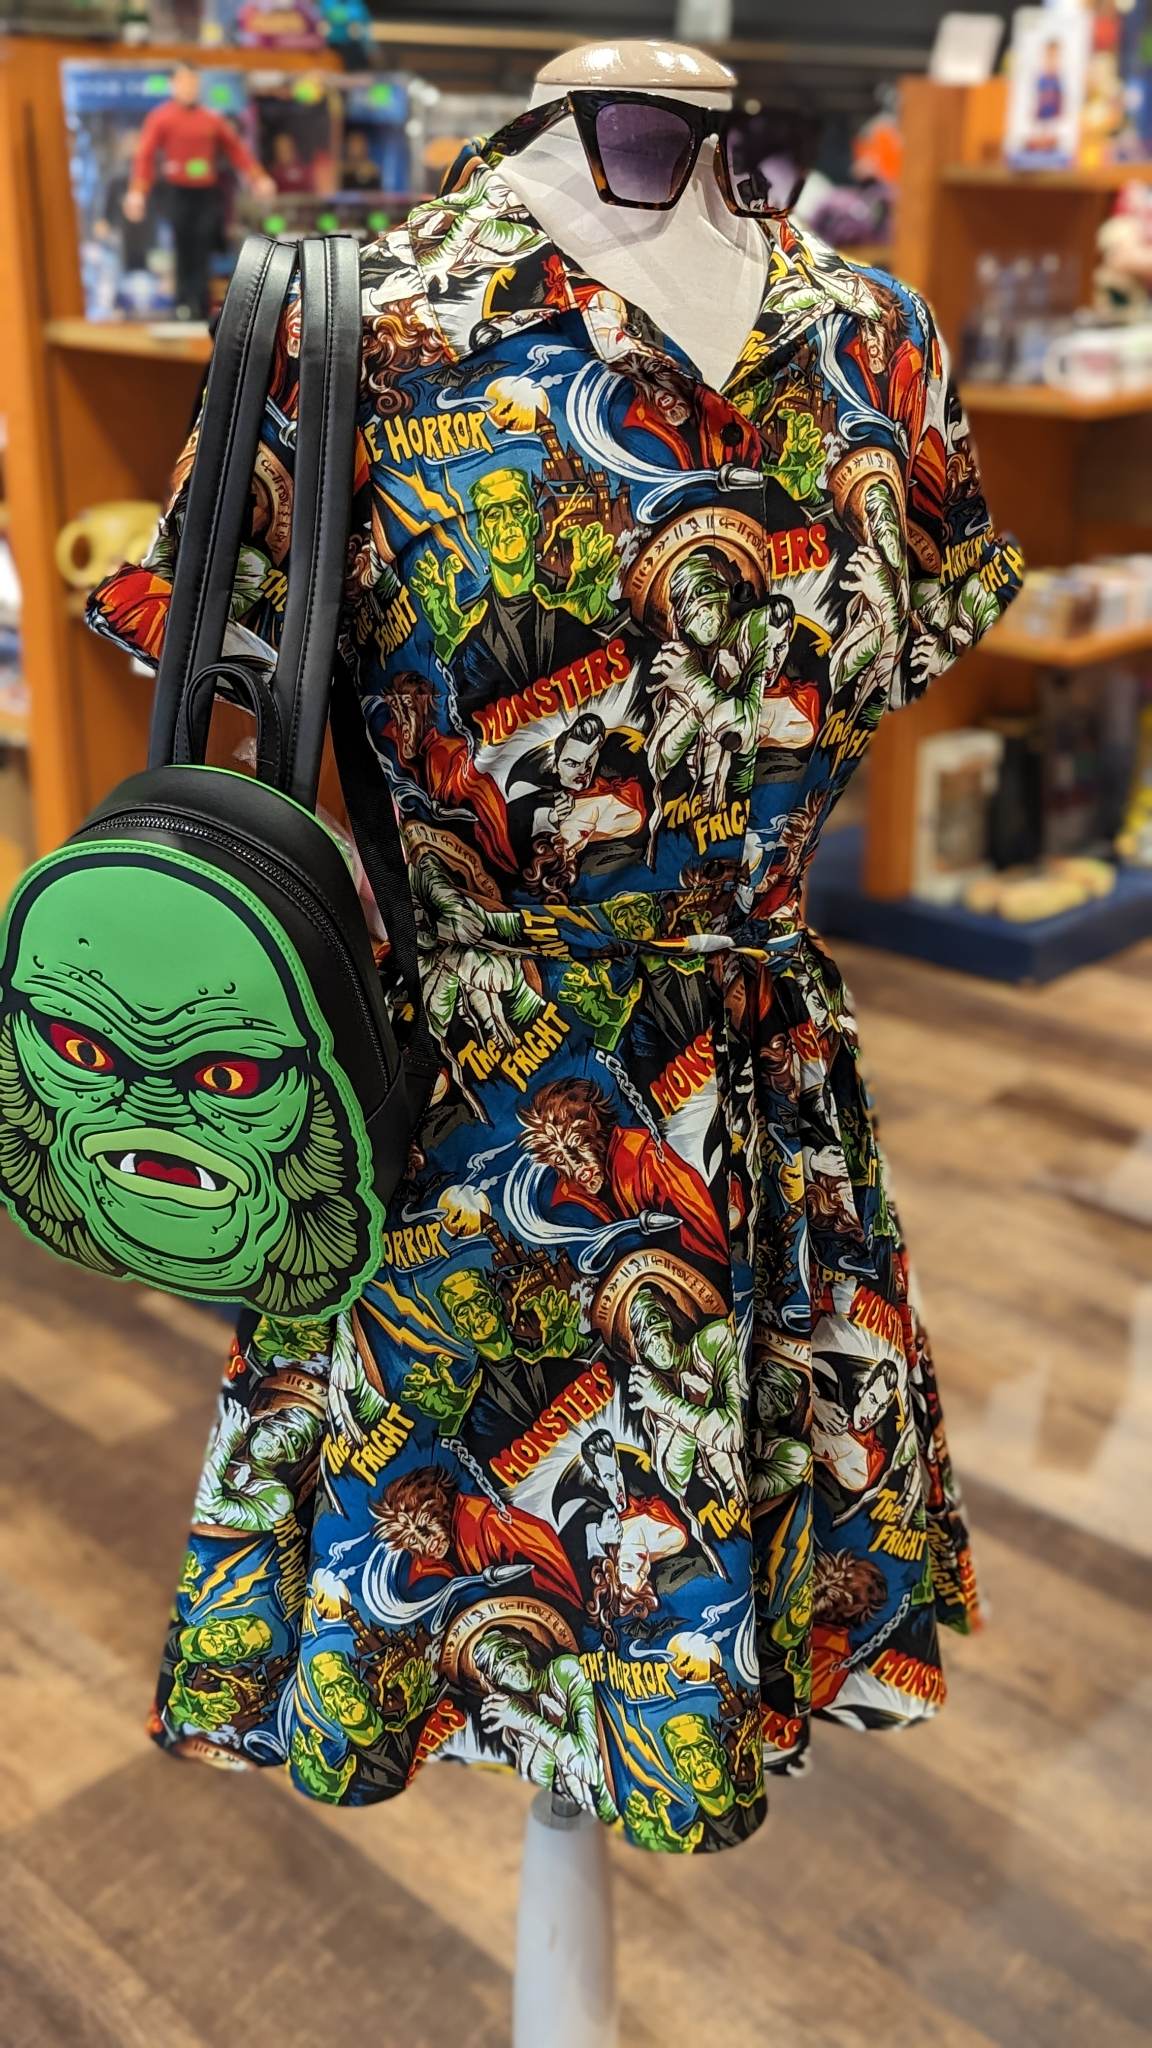 Creature from the Black Lagoon Backpack Purse